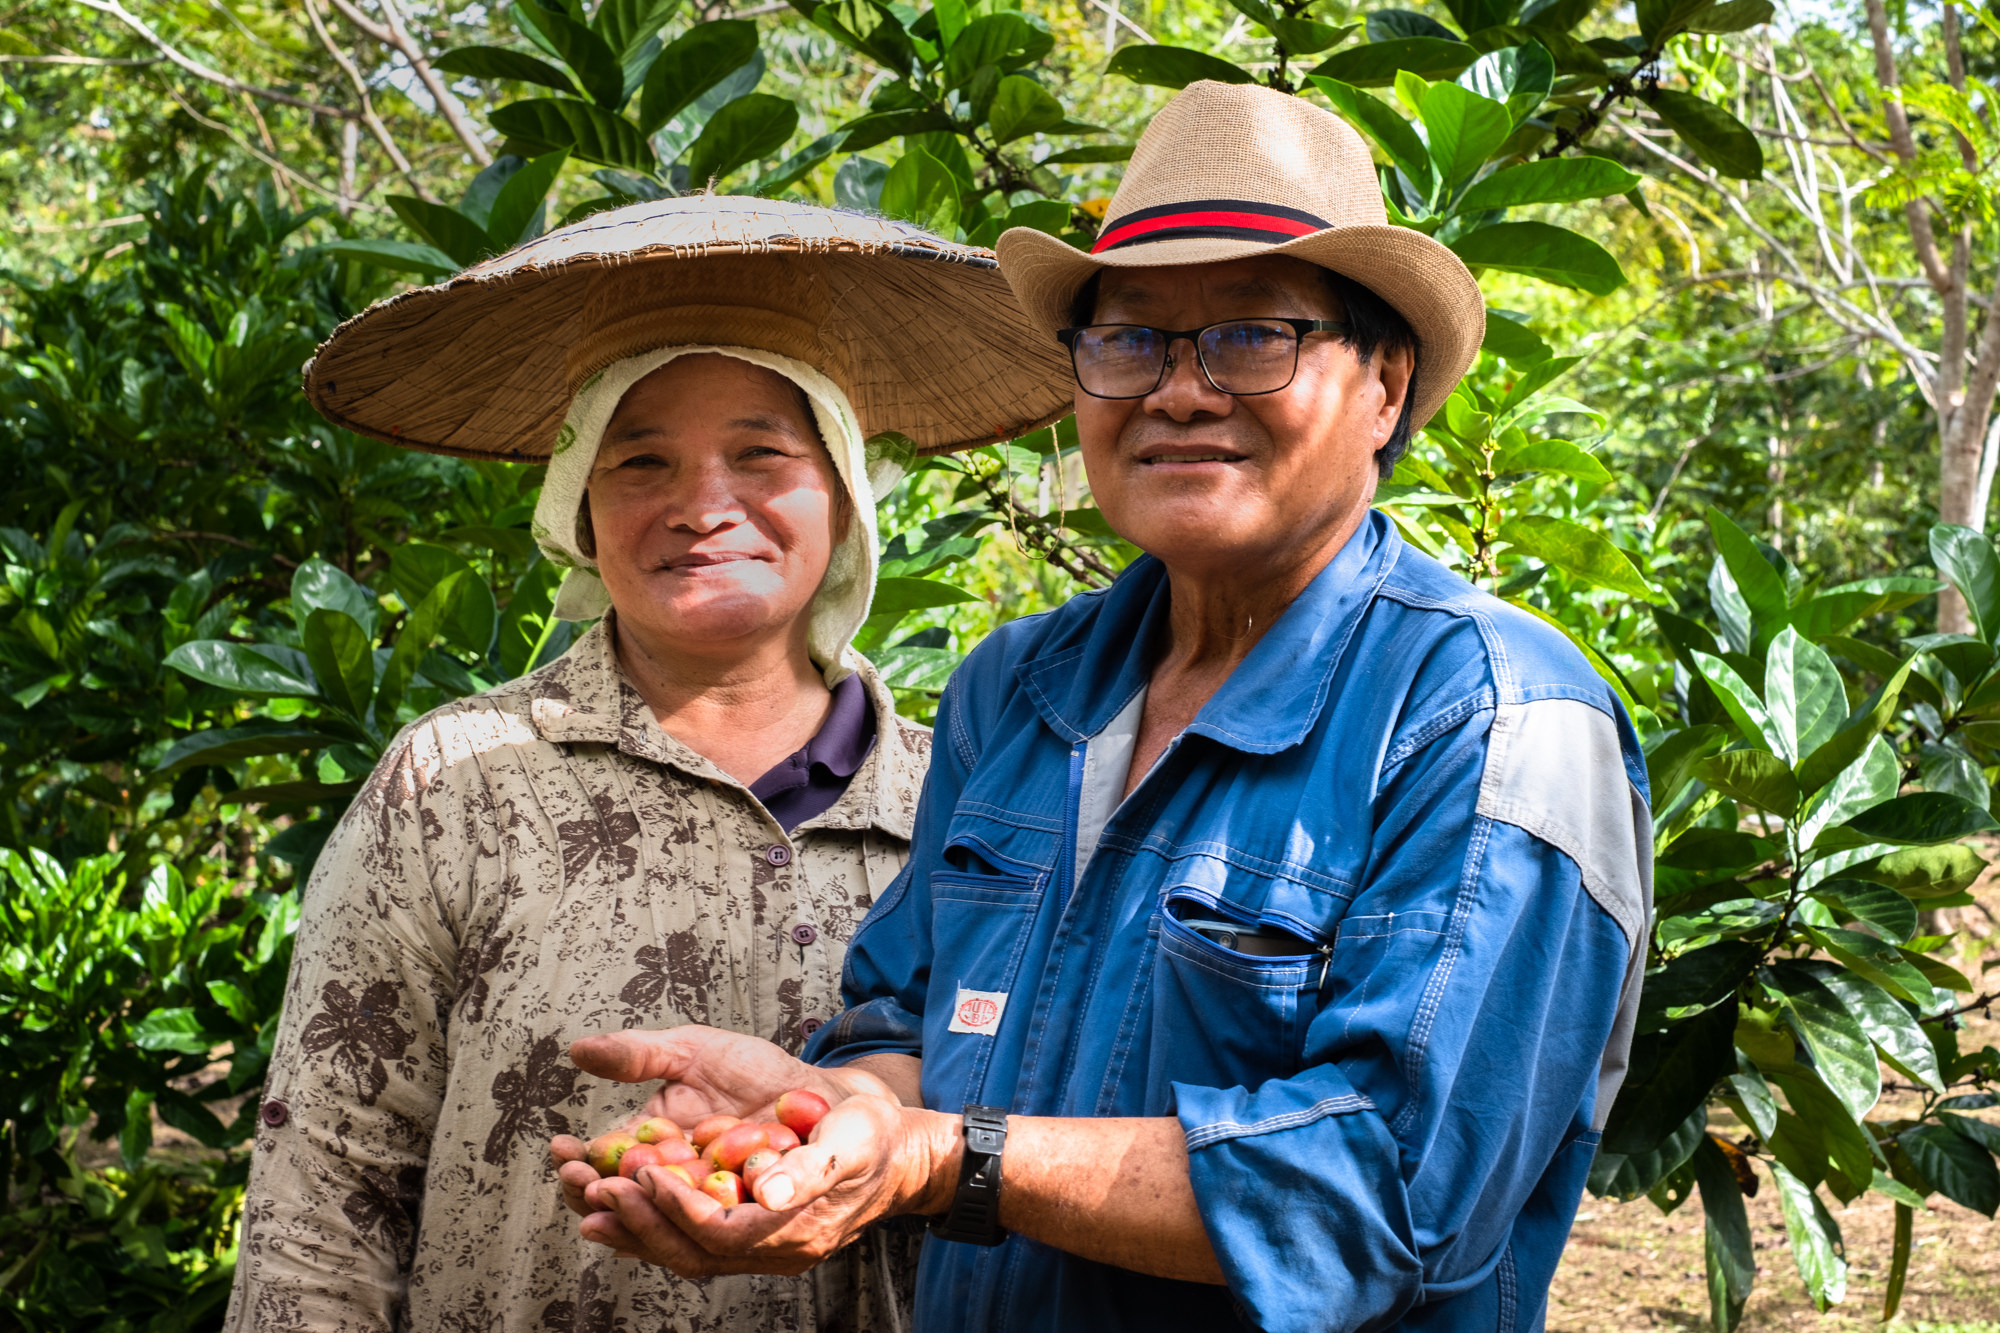 Coffee grower Tomy Pangot and his wife, Anne, with some of the coffee berries from their bushes in Long Banga, Sarawak, Malaysia. Indigenous farmers like him hope to increase their income and draw more tourists to the area. Photo: Chan Kit Yeng